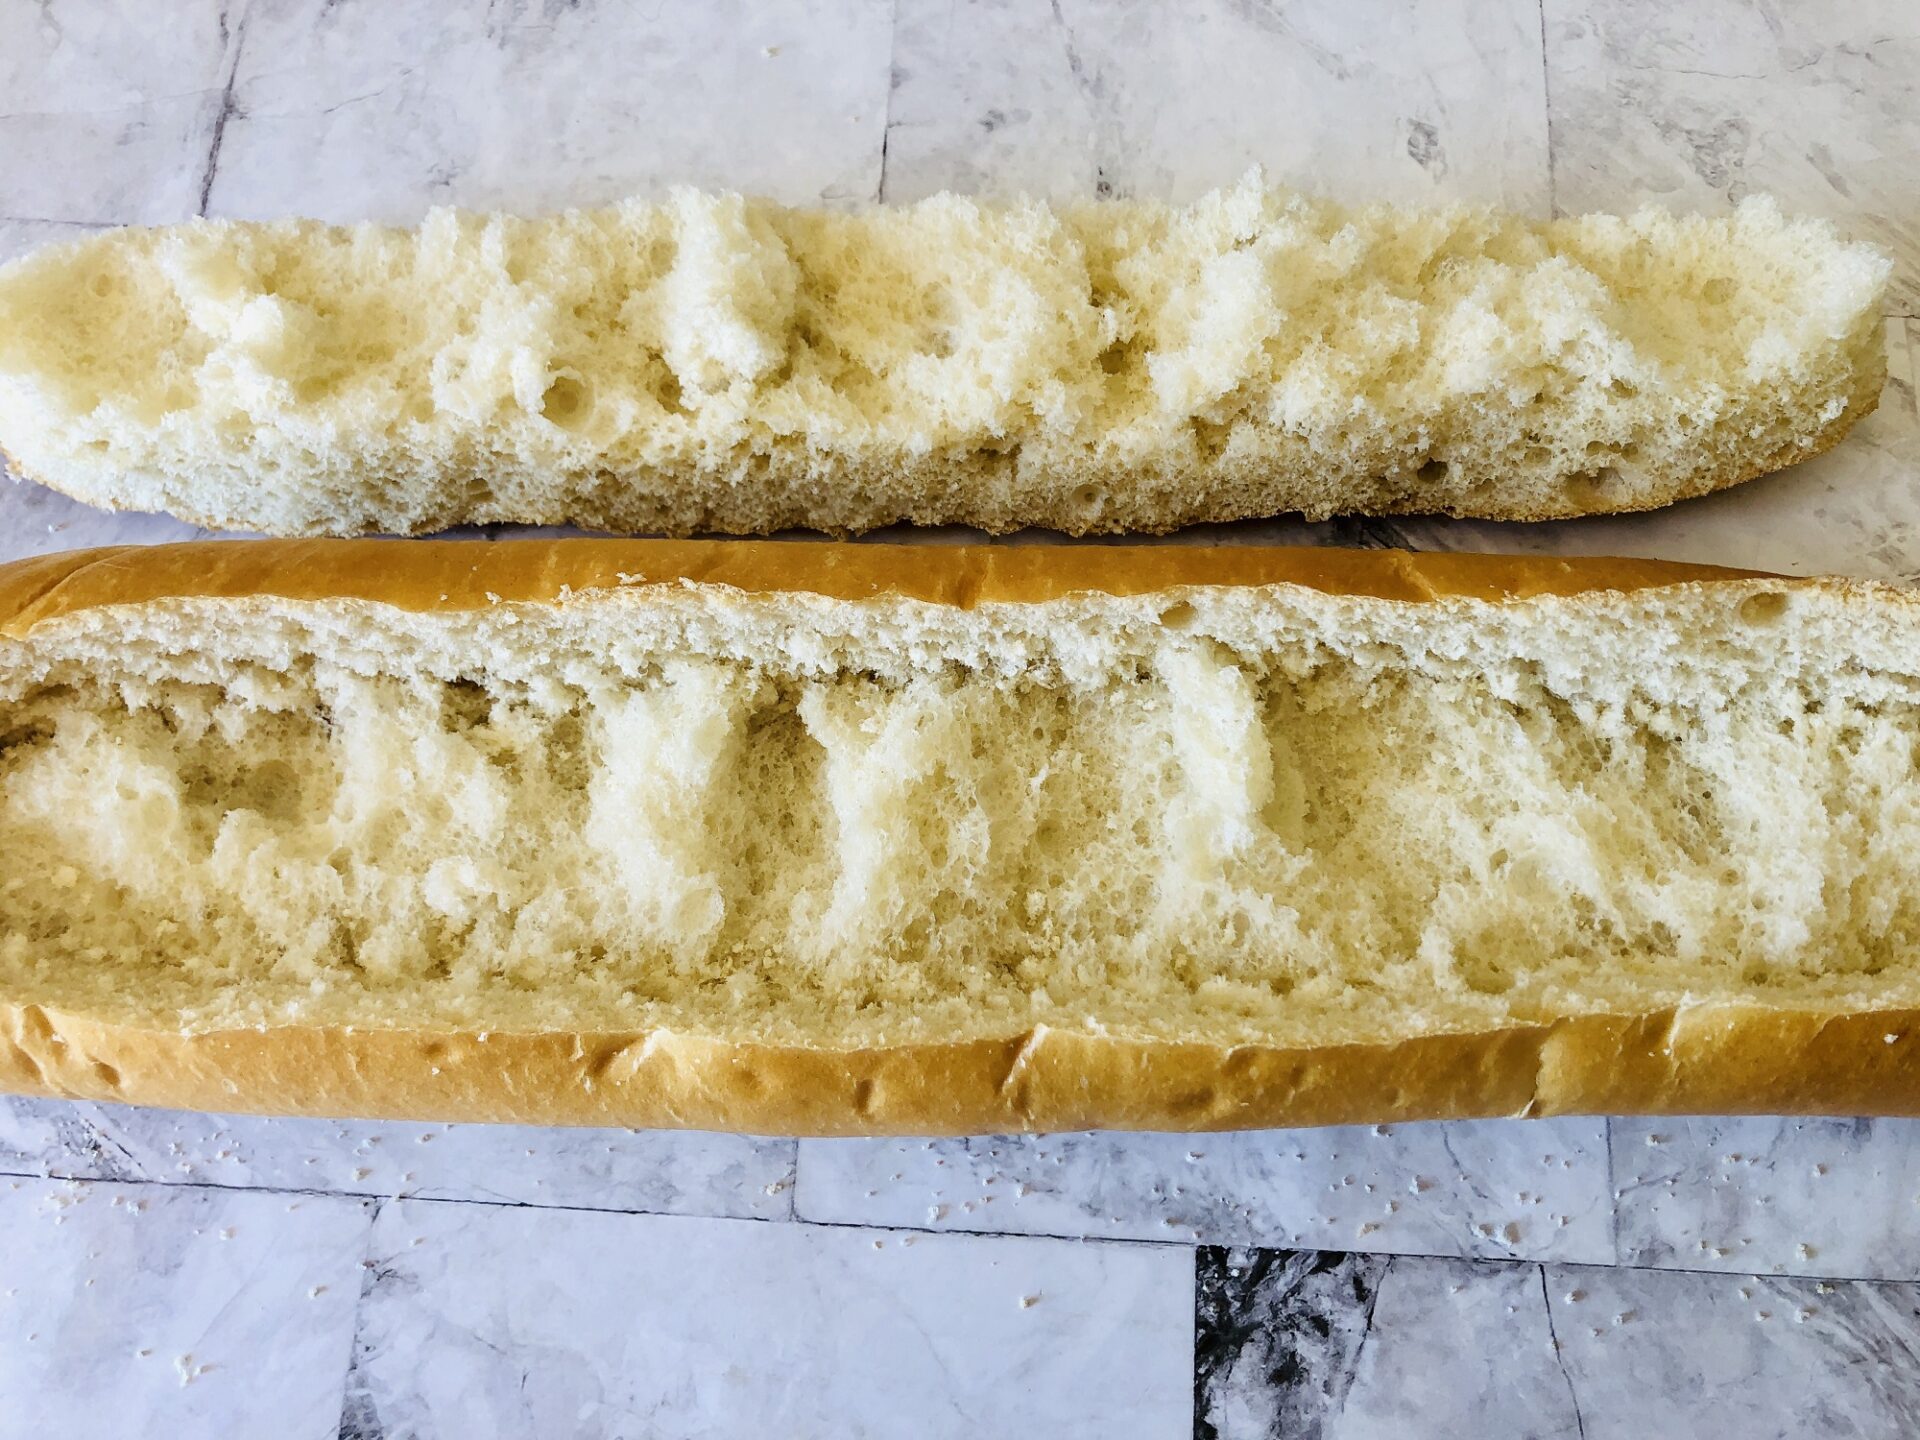 A baguette carved out to be filled.